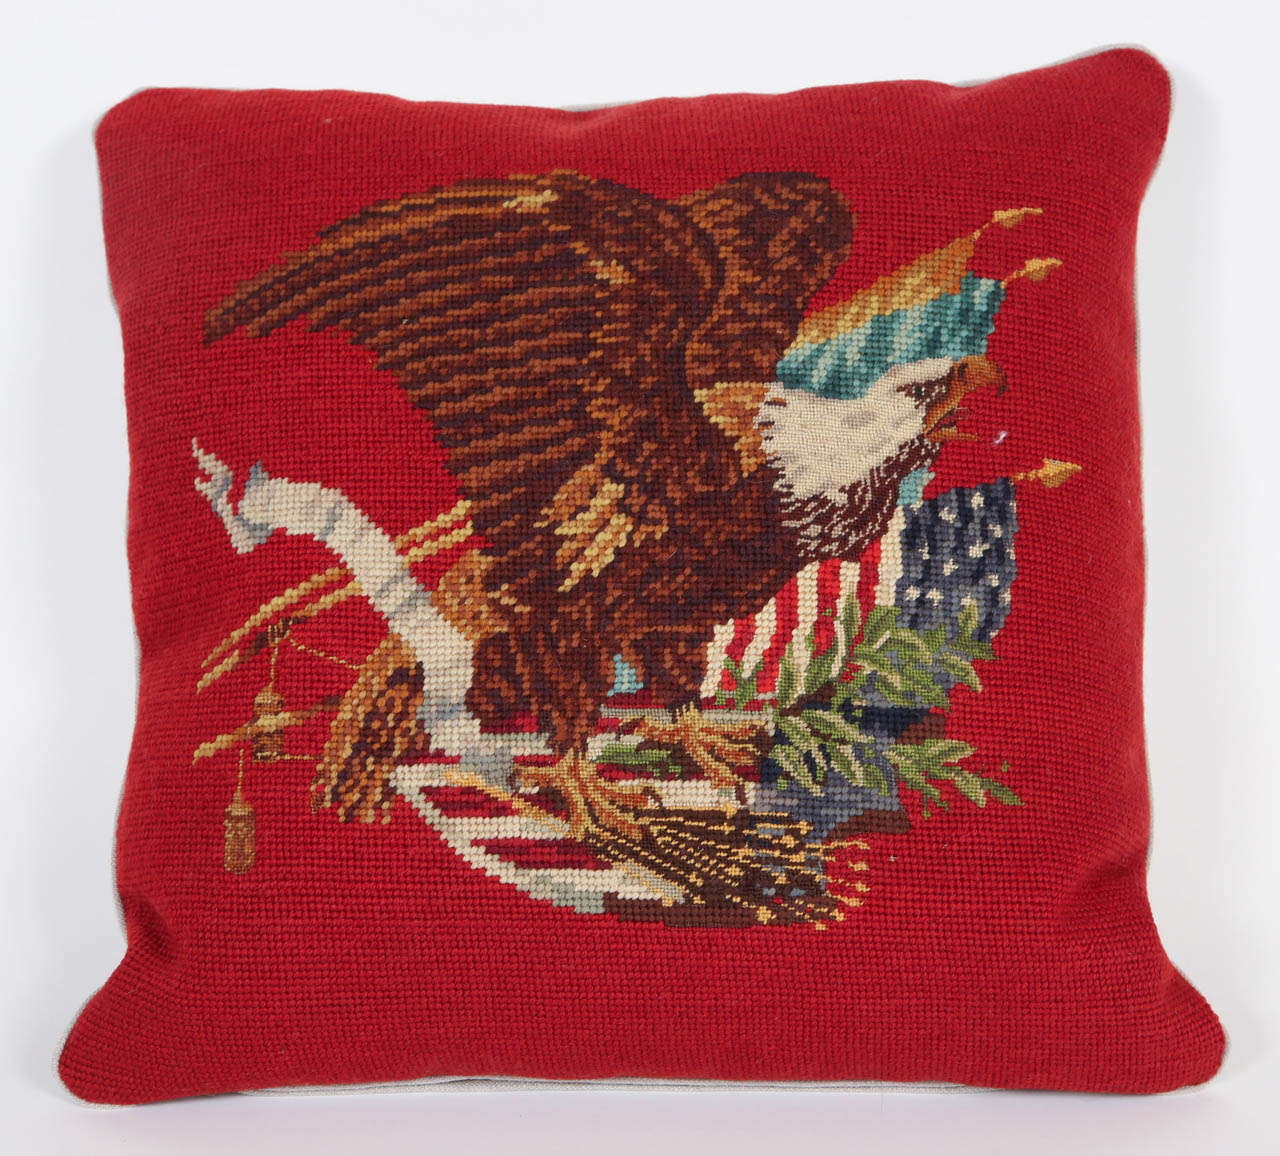 Vintage needlepoint of eagle and American flag made into pillow with down insert.